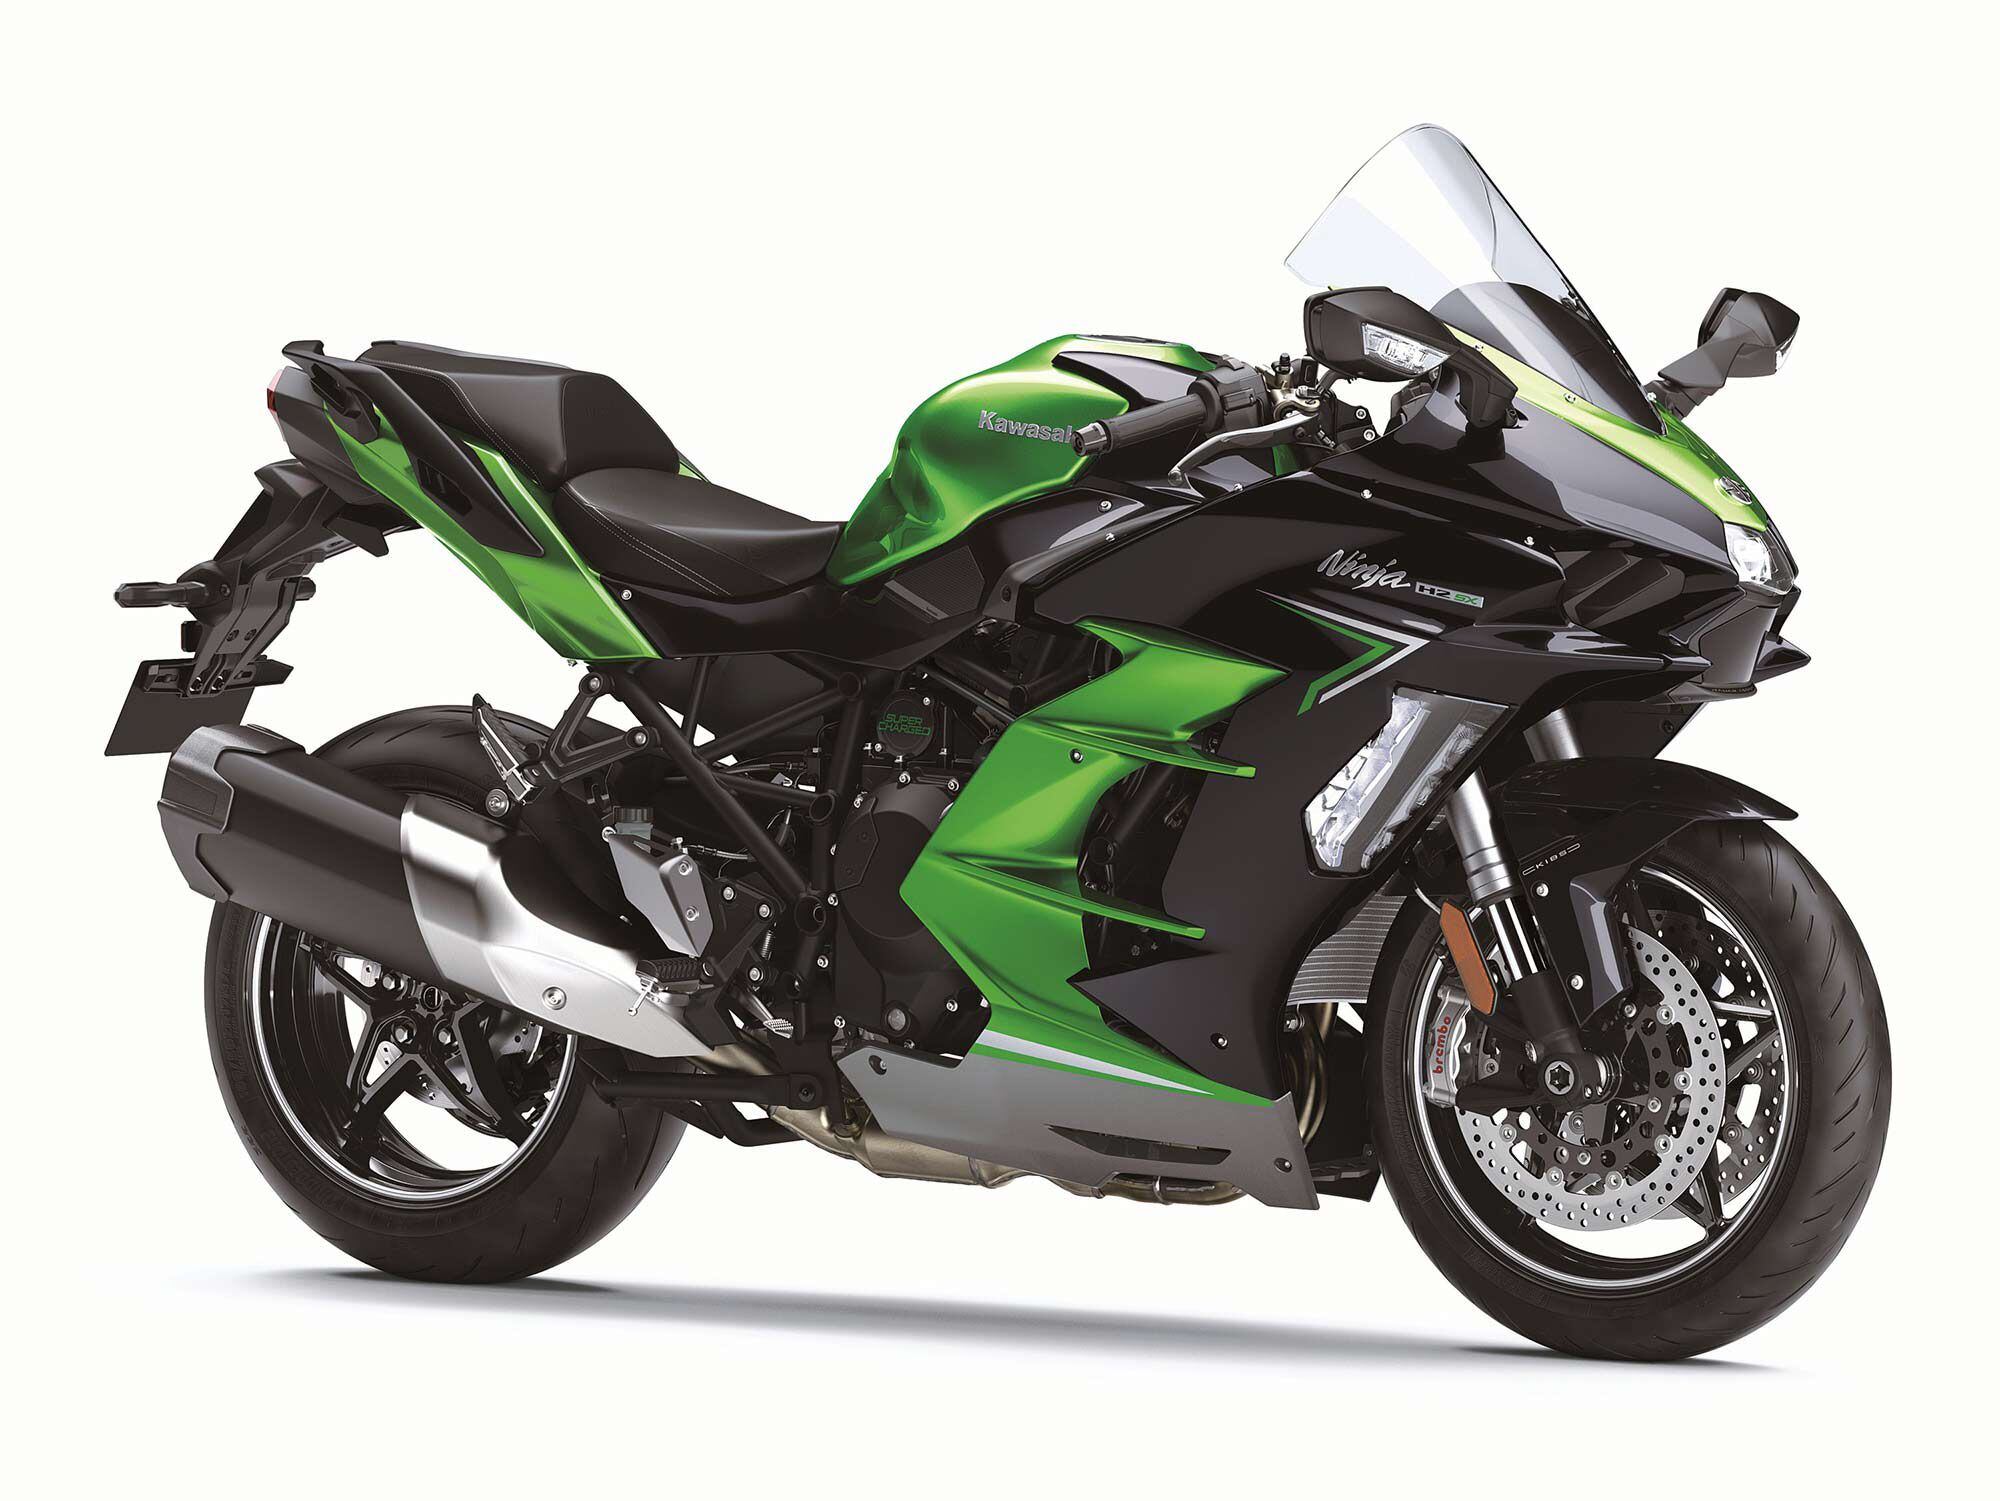 Cruise missile or motorcycle? The Ninja H2 SX SE’s supercharged engine borders on both.